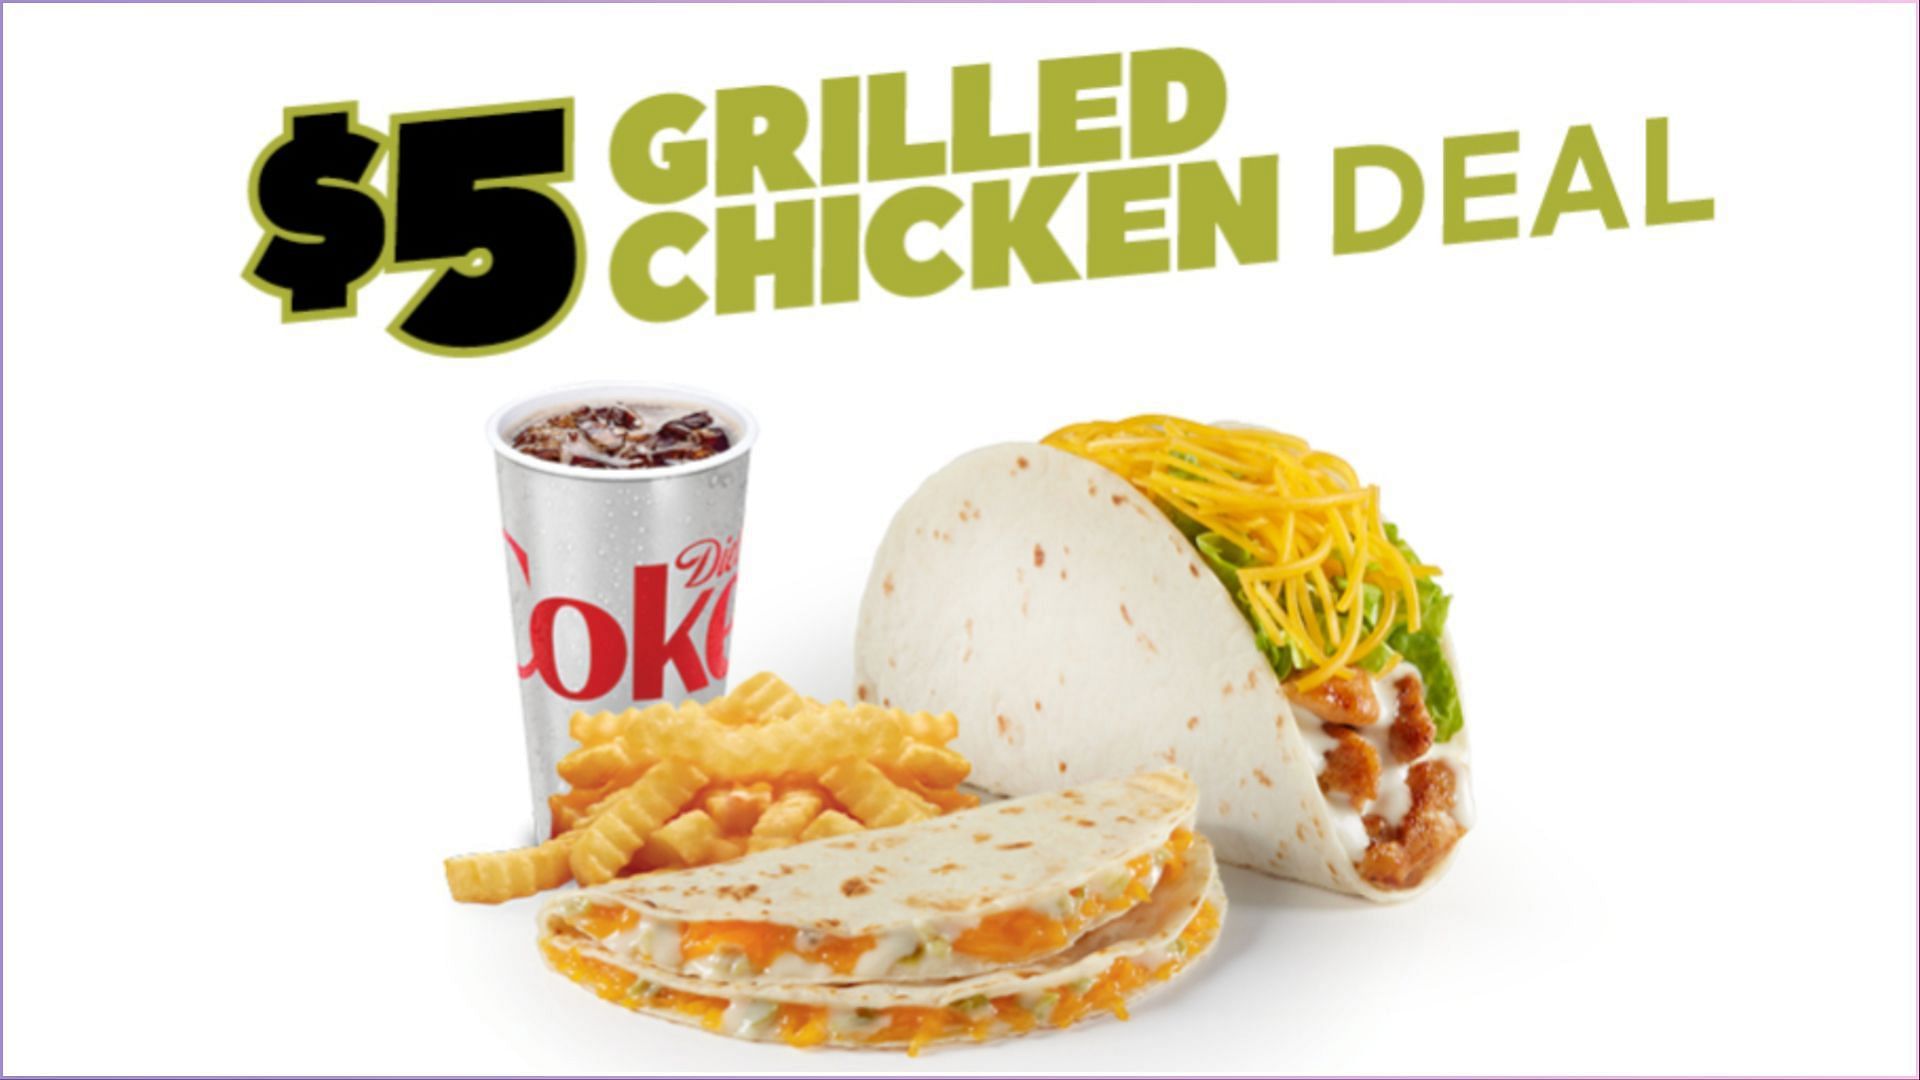 $5 Grilled Chicken Taco Del&rsquo;s Deal&reg; can be enjoyed all across the country (Image via Del Taco)